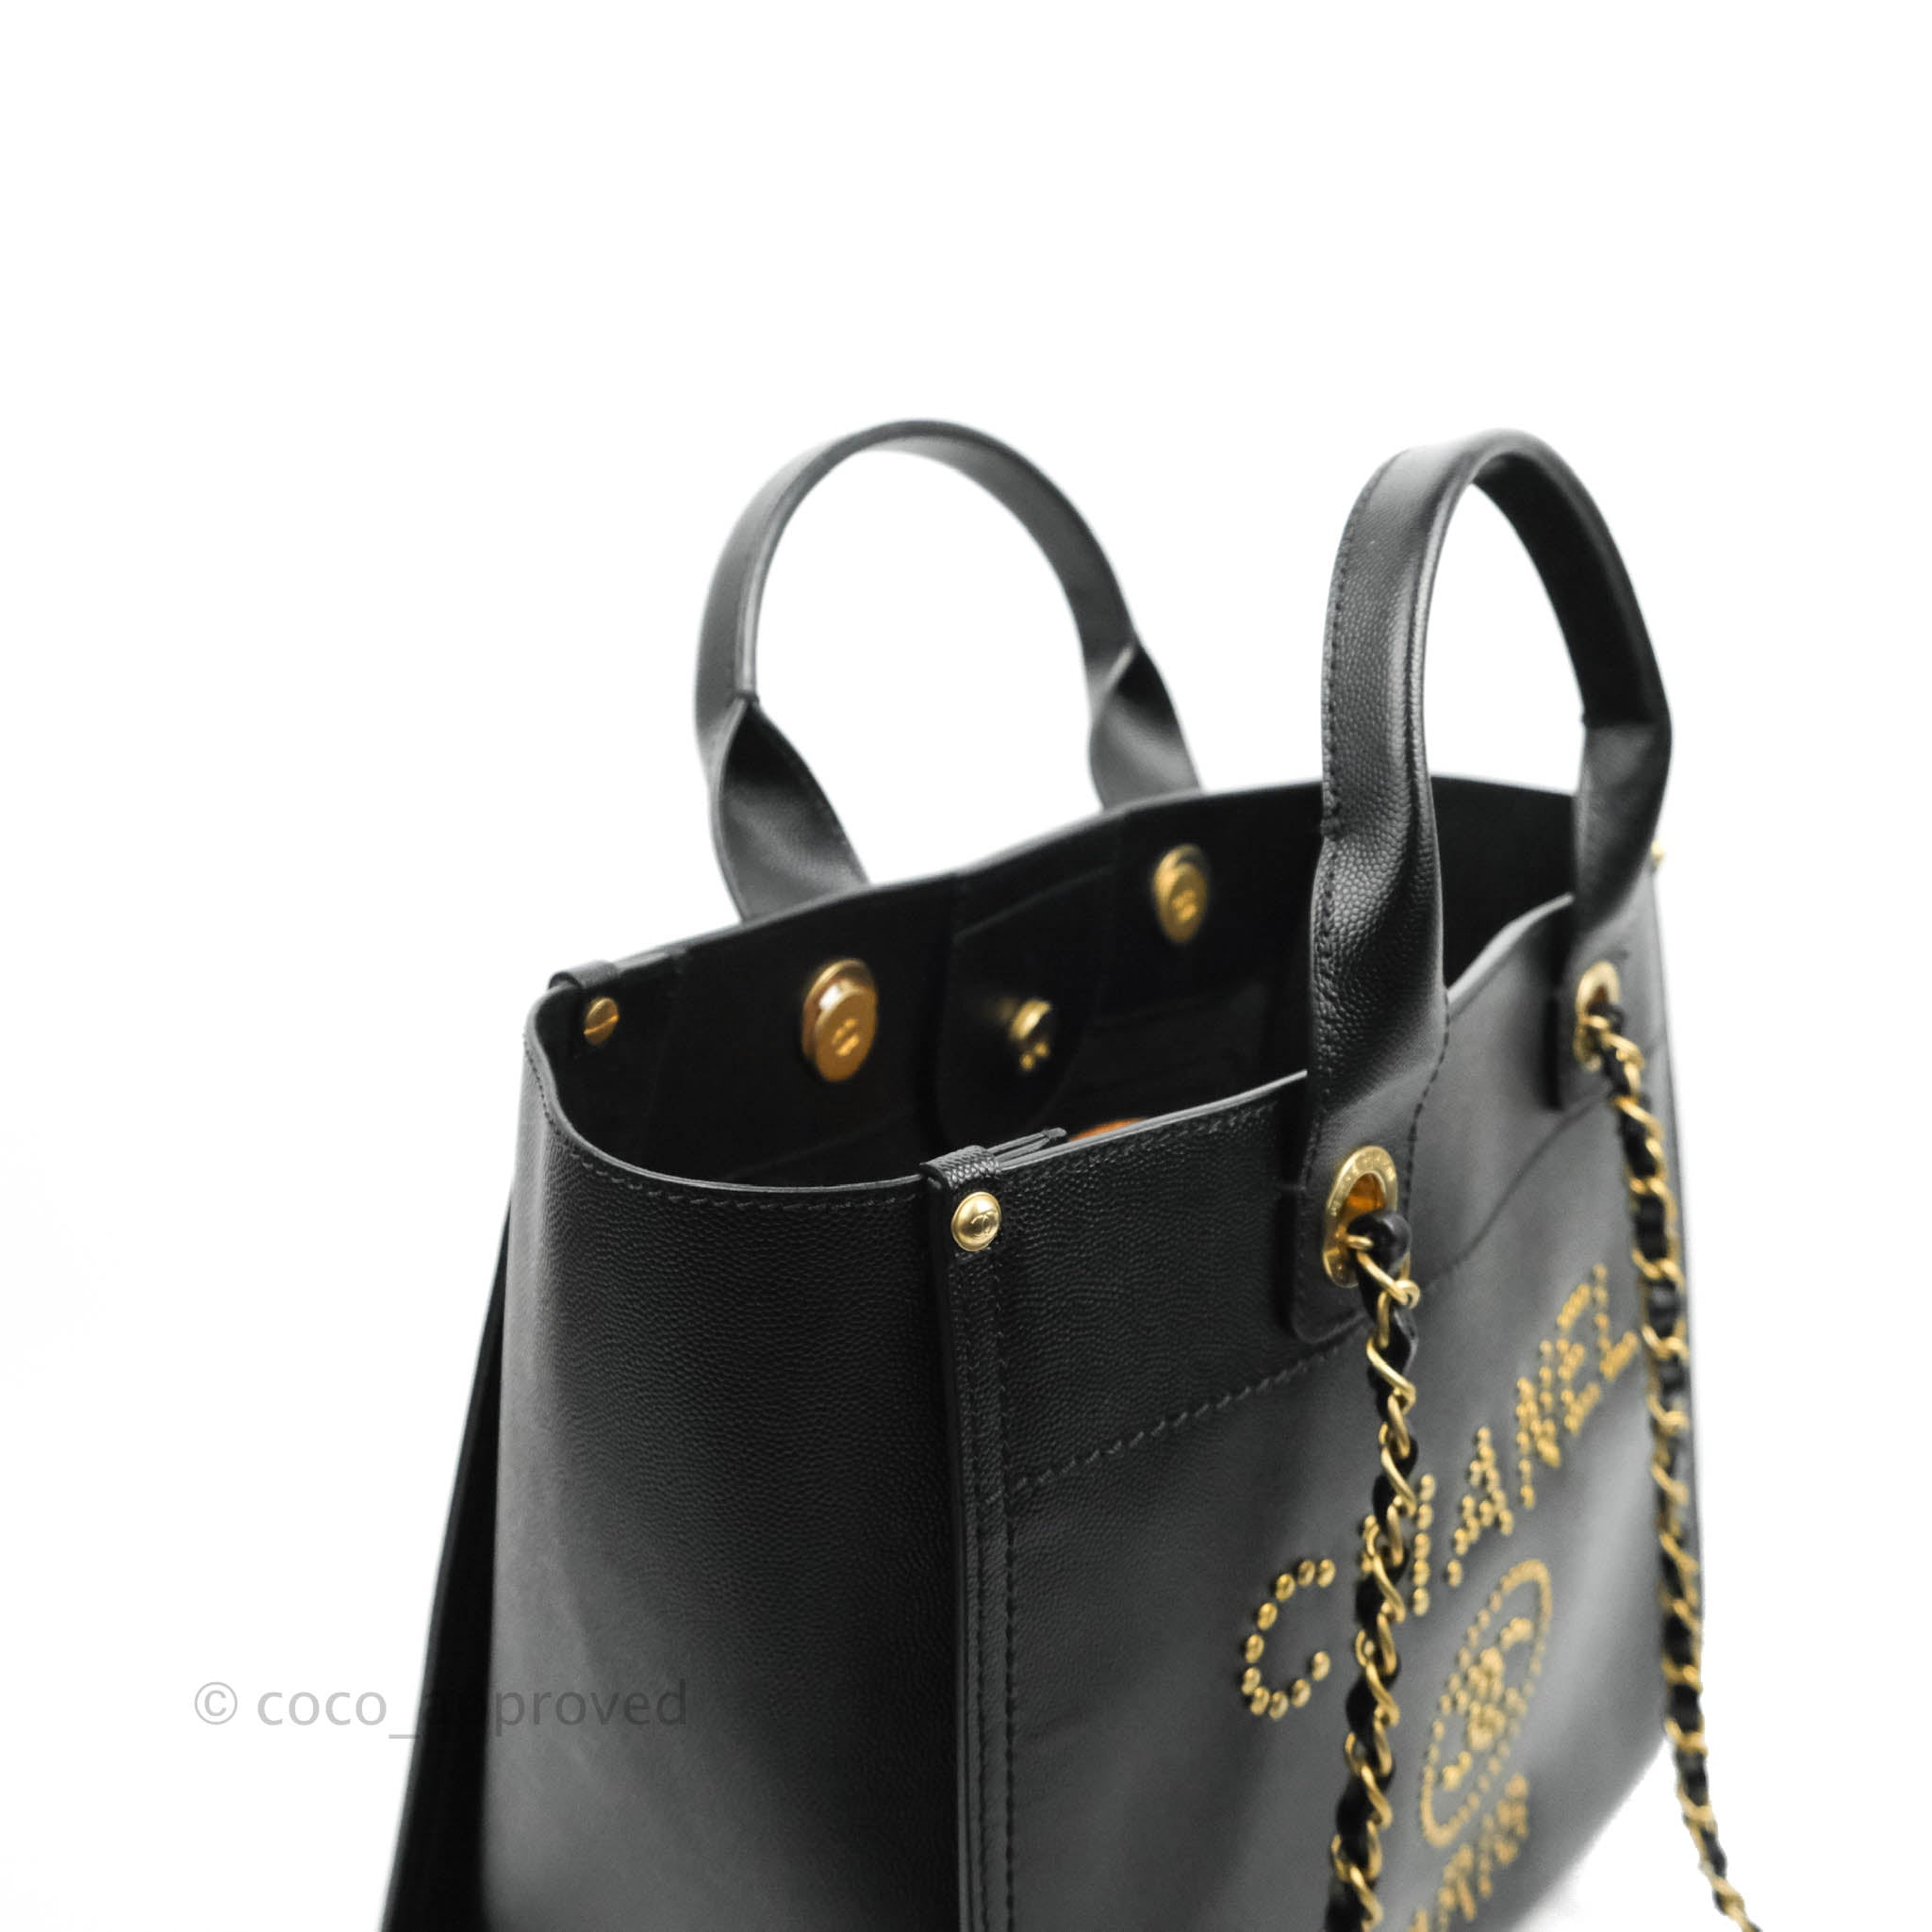 Chanel Leather Deauville Small, Black Caviar with Gold Hardware, Preowned  in Dustbag WA001